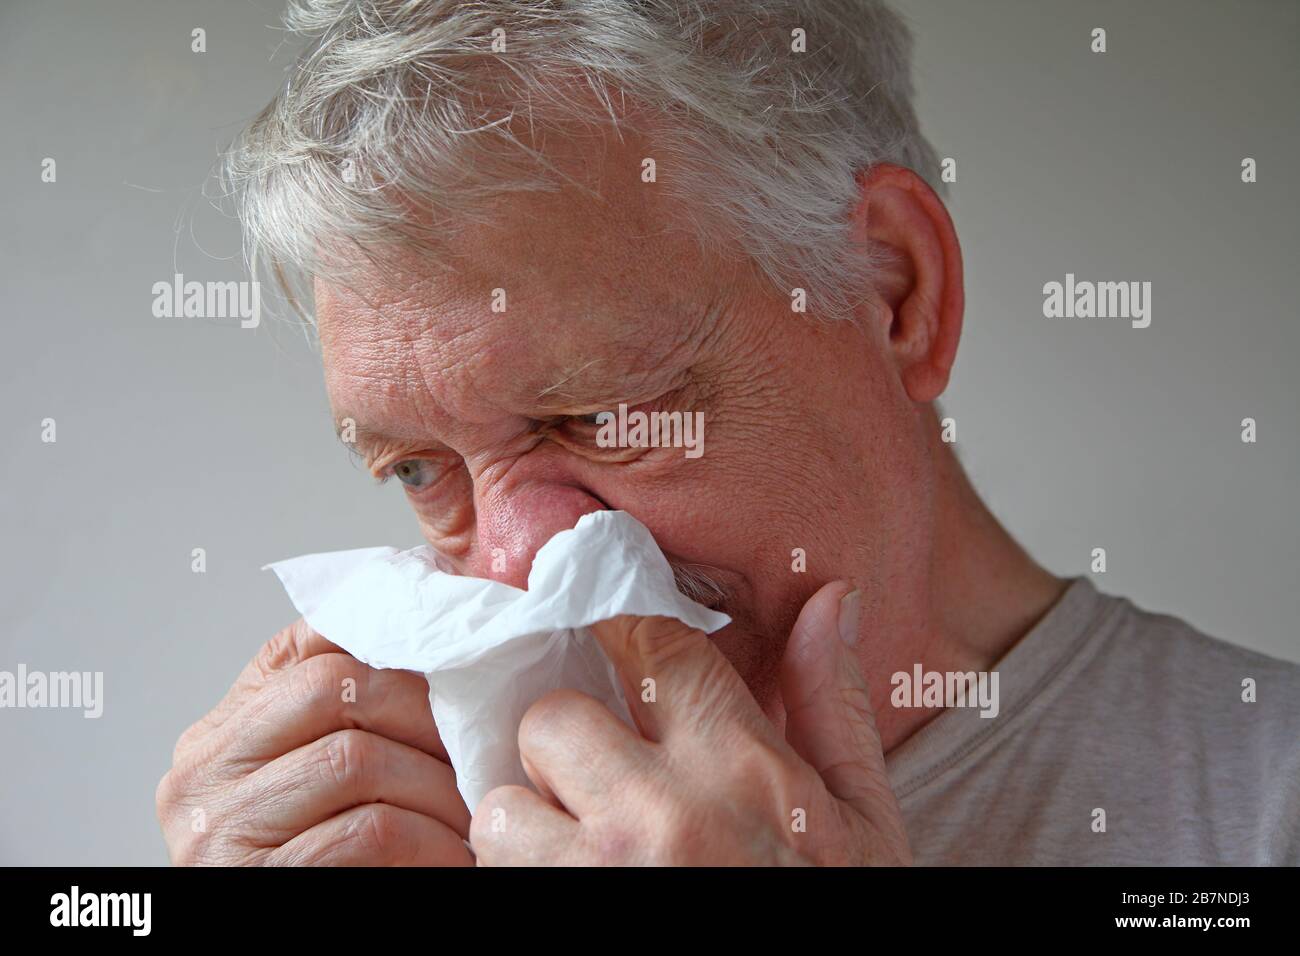 Sick man uses a tissue to blow his nose Stock Photo